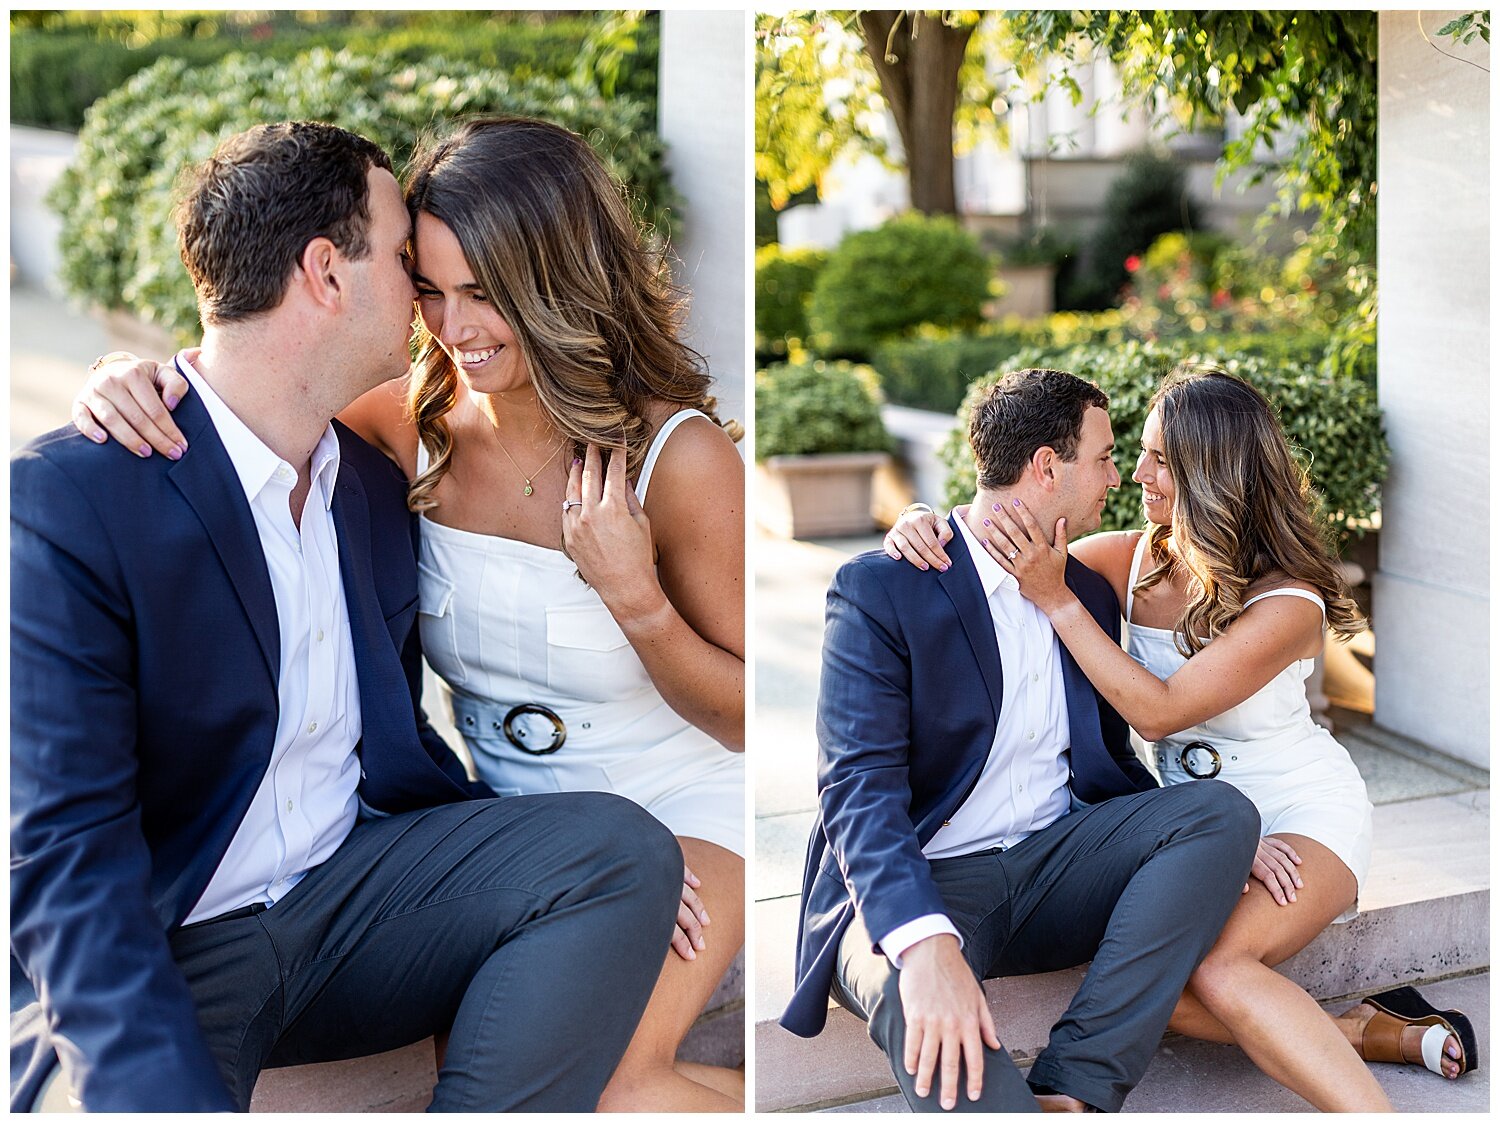 Haylie Chris National Mall Engagement Session 2020 Living Radiant Photography_0013.jpg